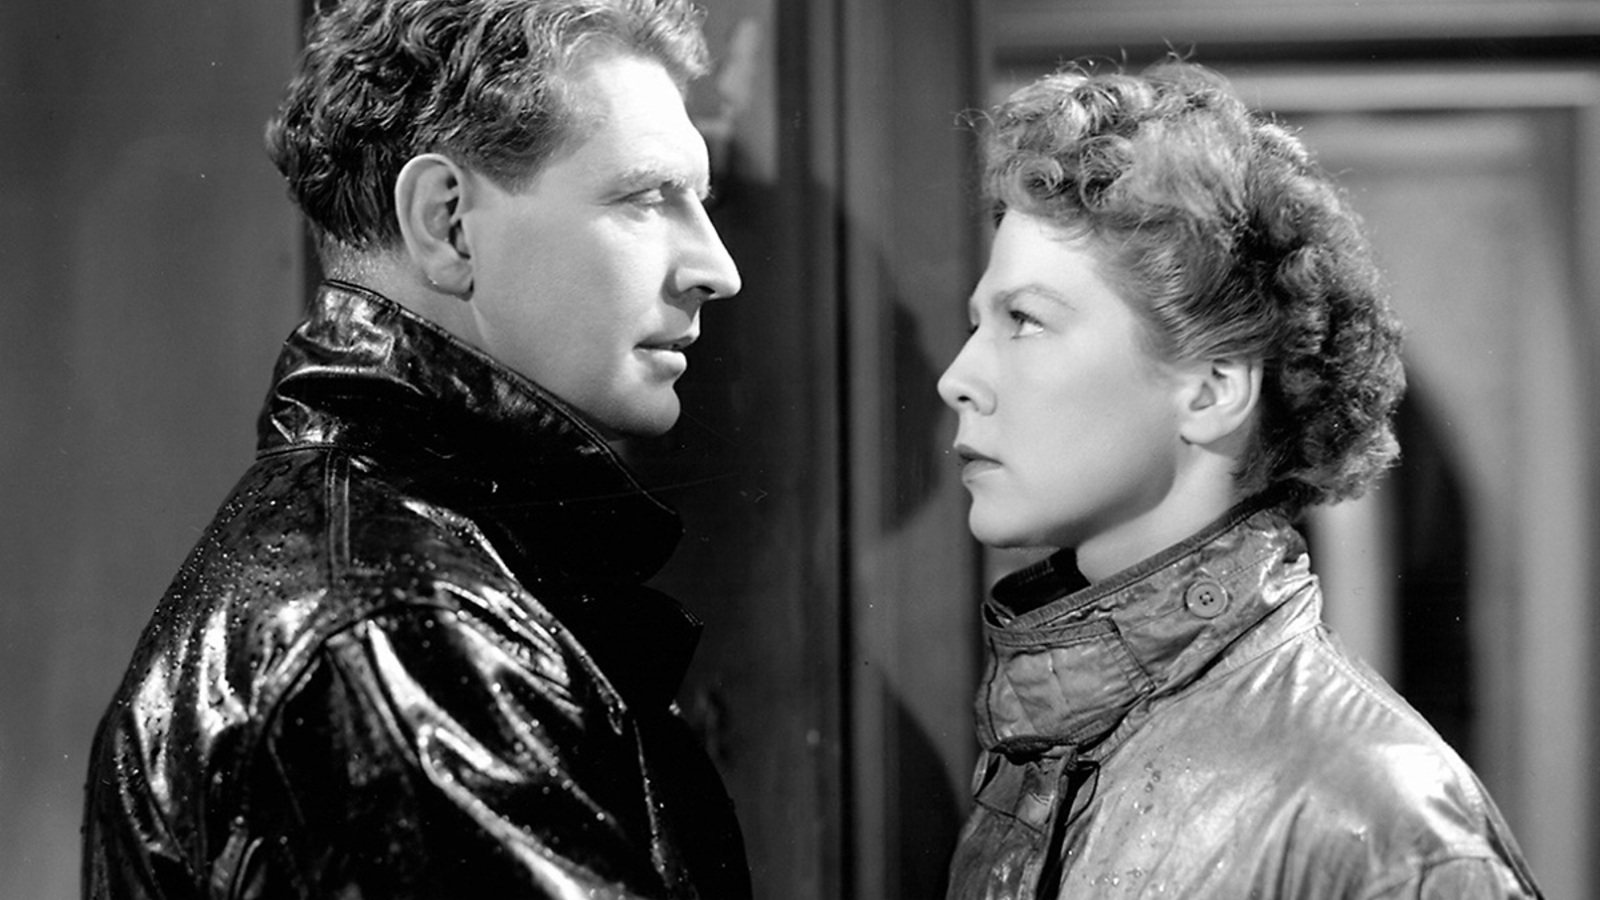 Torquil and Joan face off in a scene from I KNOW WHERE I'M GOING